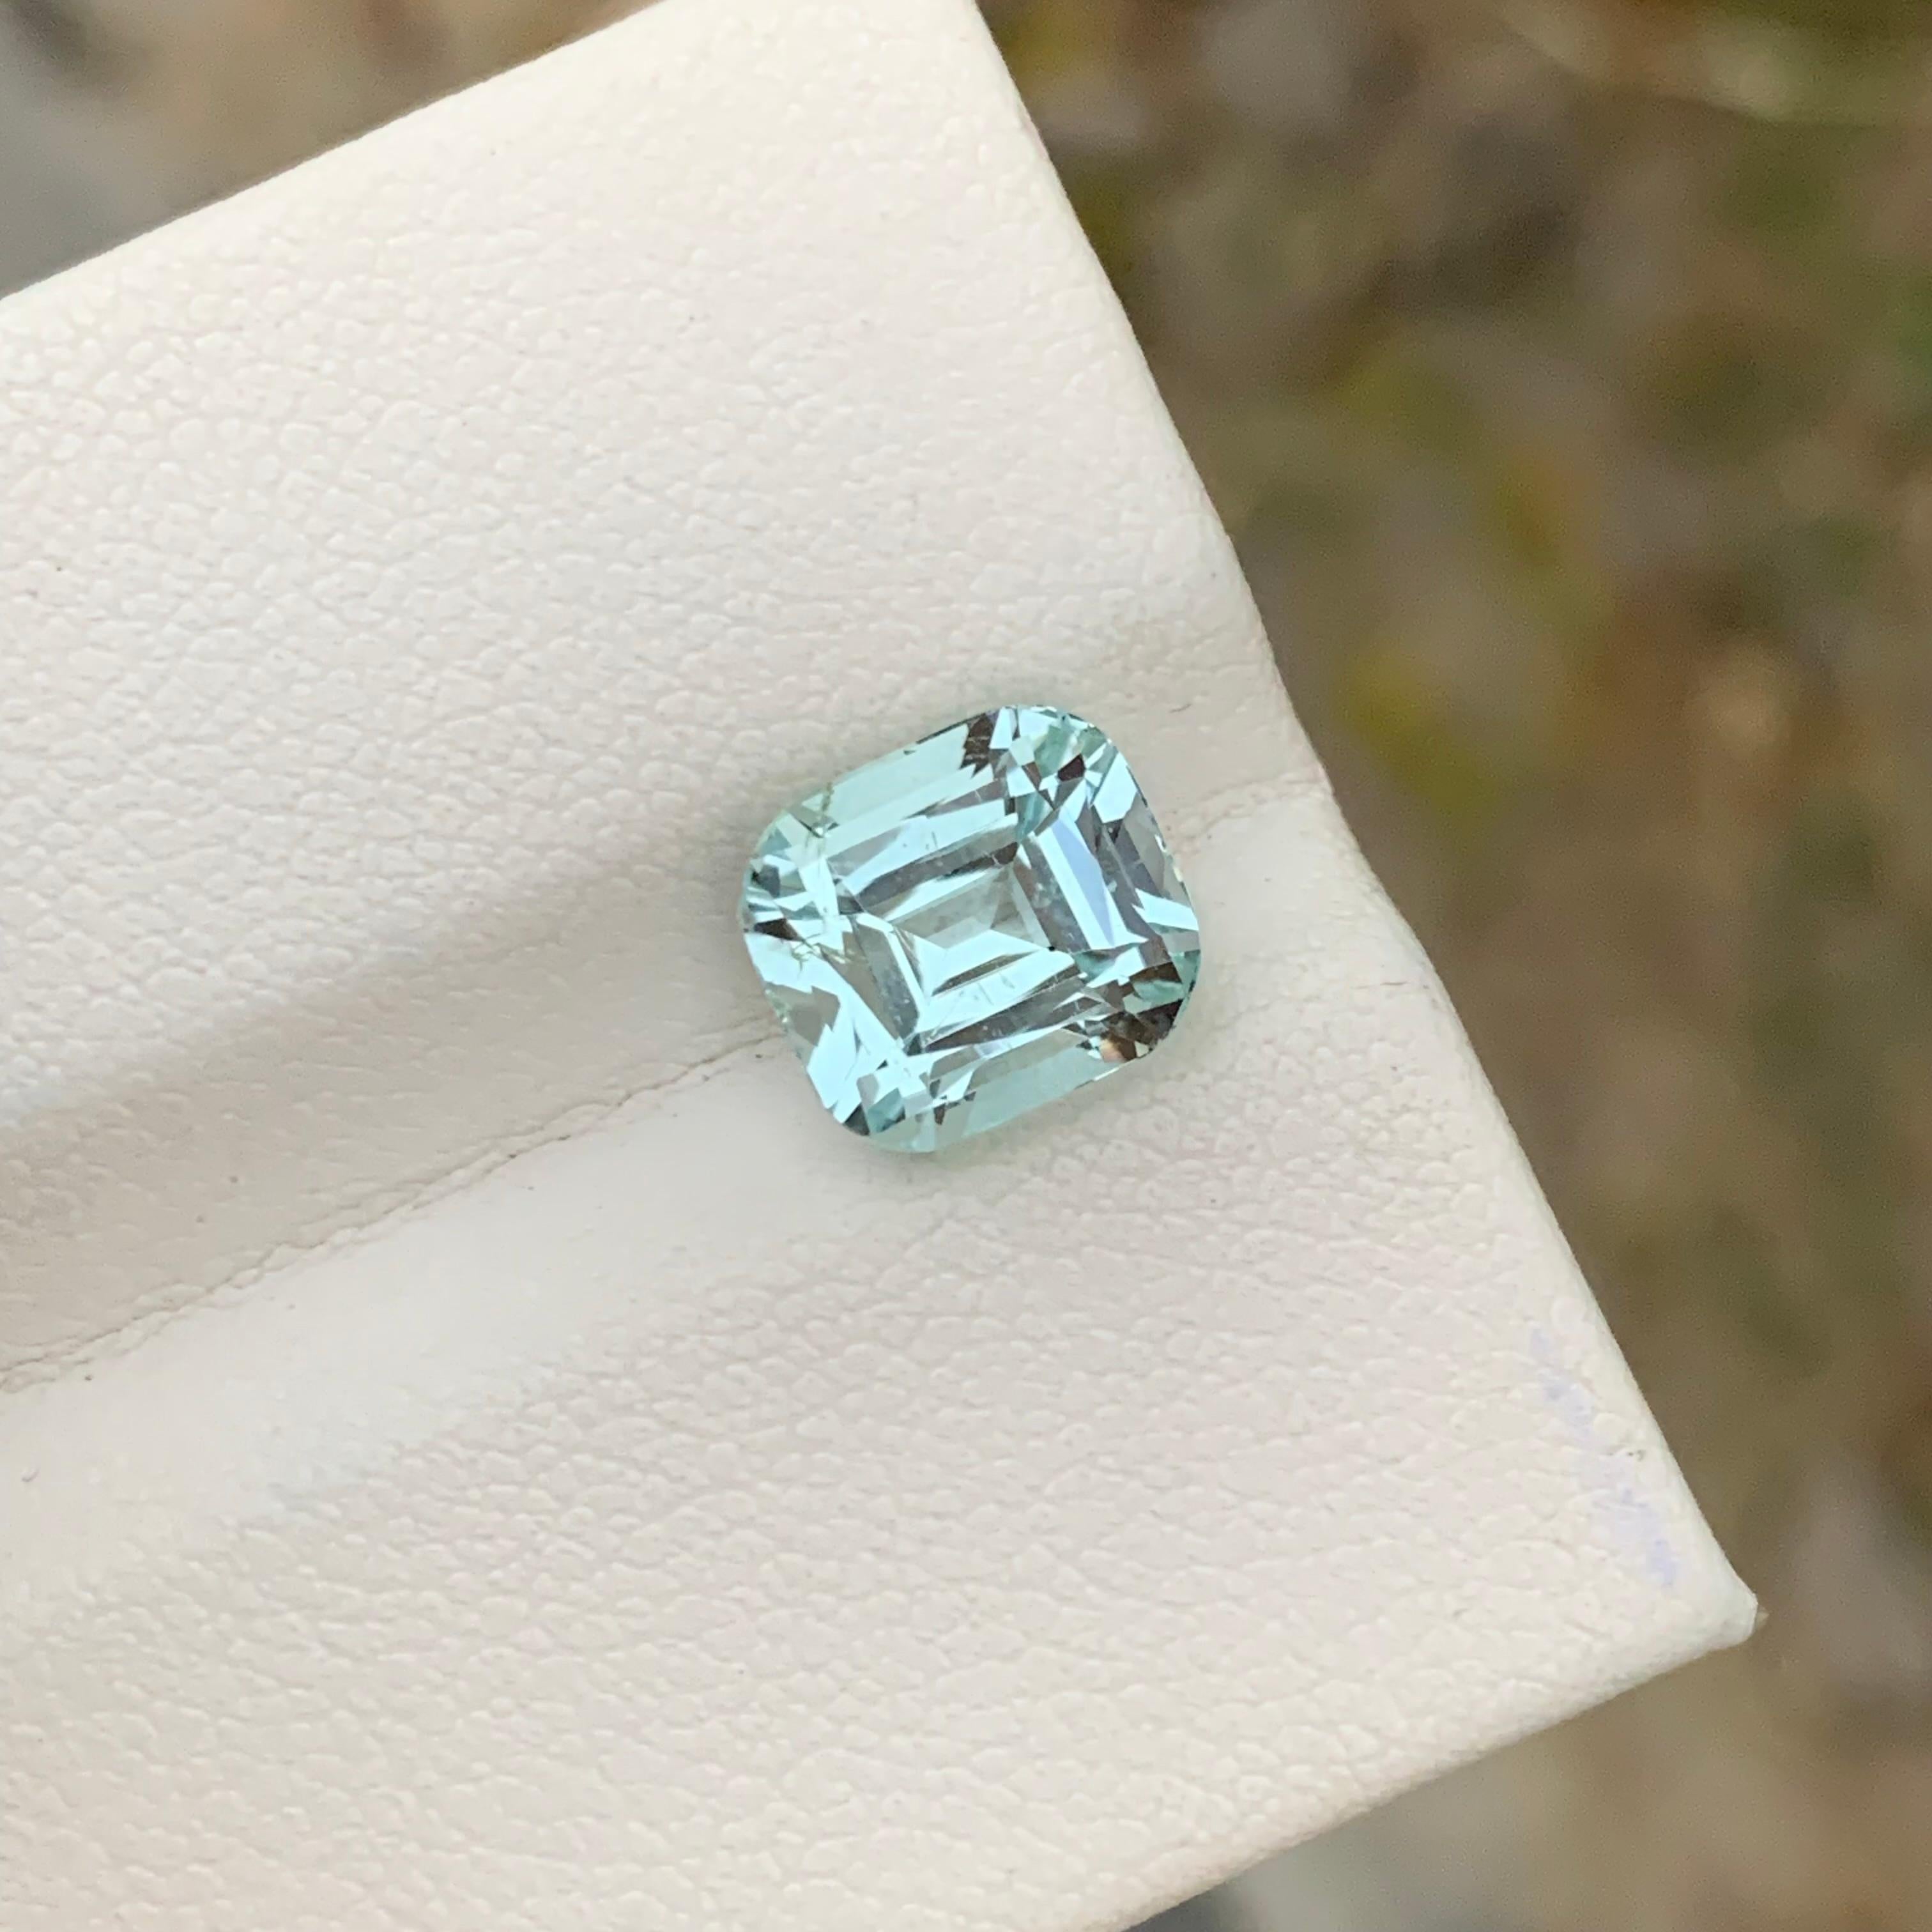 3.55 Carats Natural Loose Aquamarine Ring Gem From Shigar Valley Mine For Sale 5